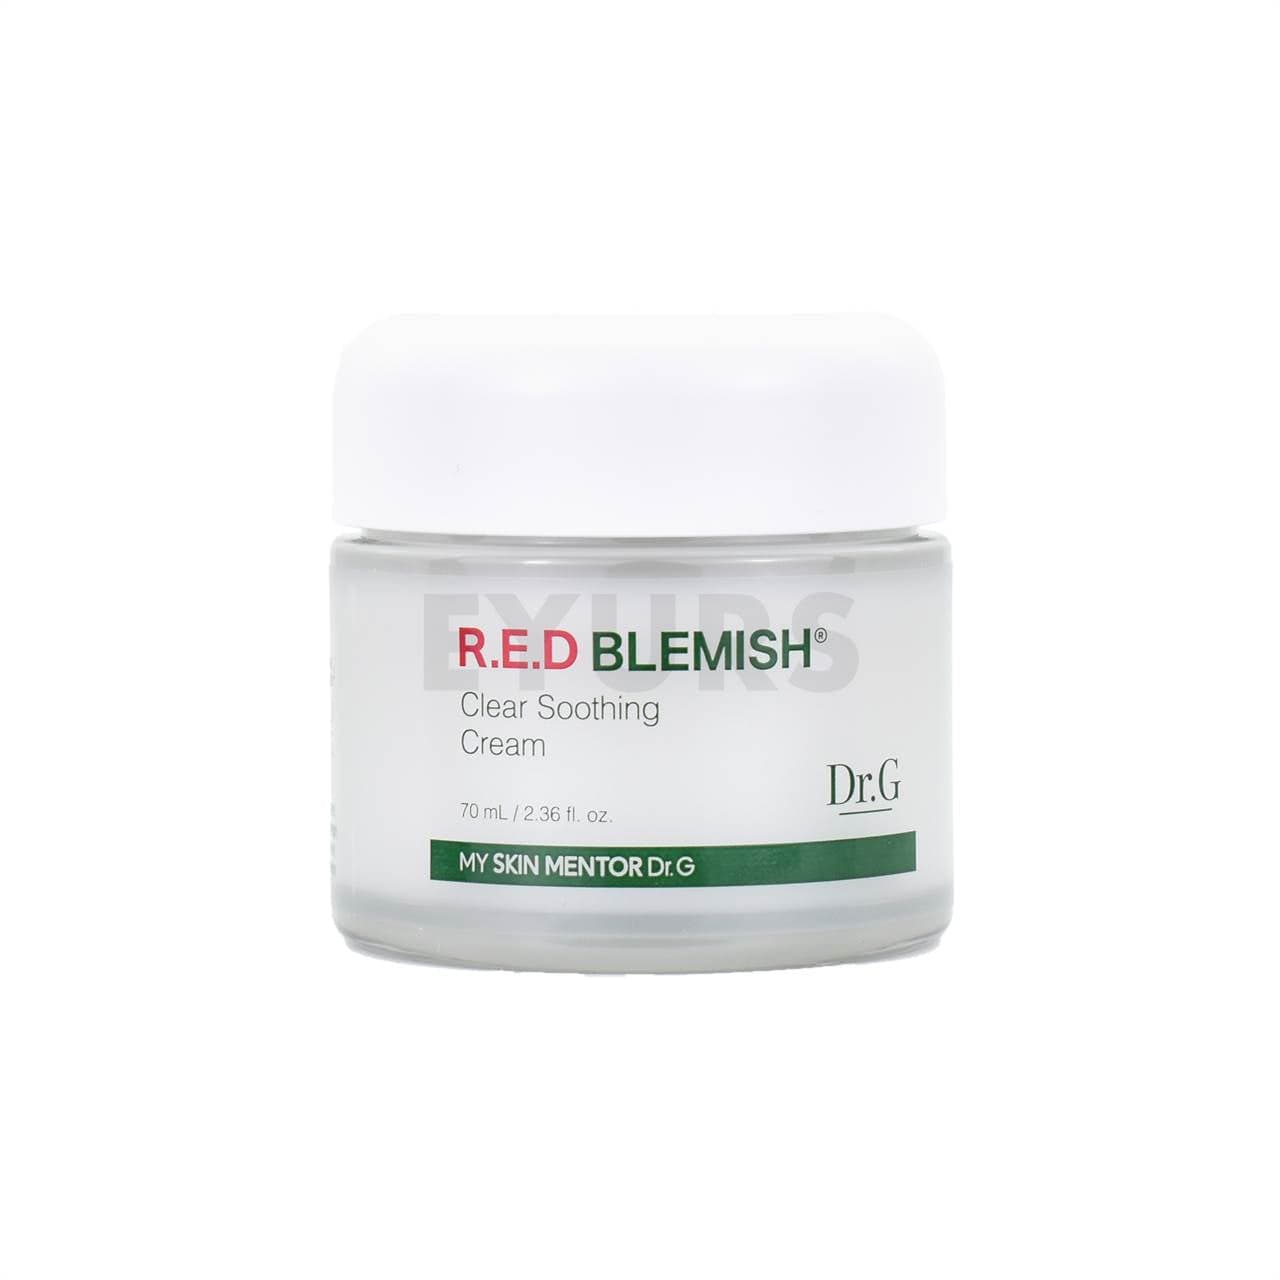 dr g red blemish clear soothing cream